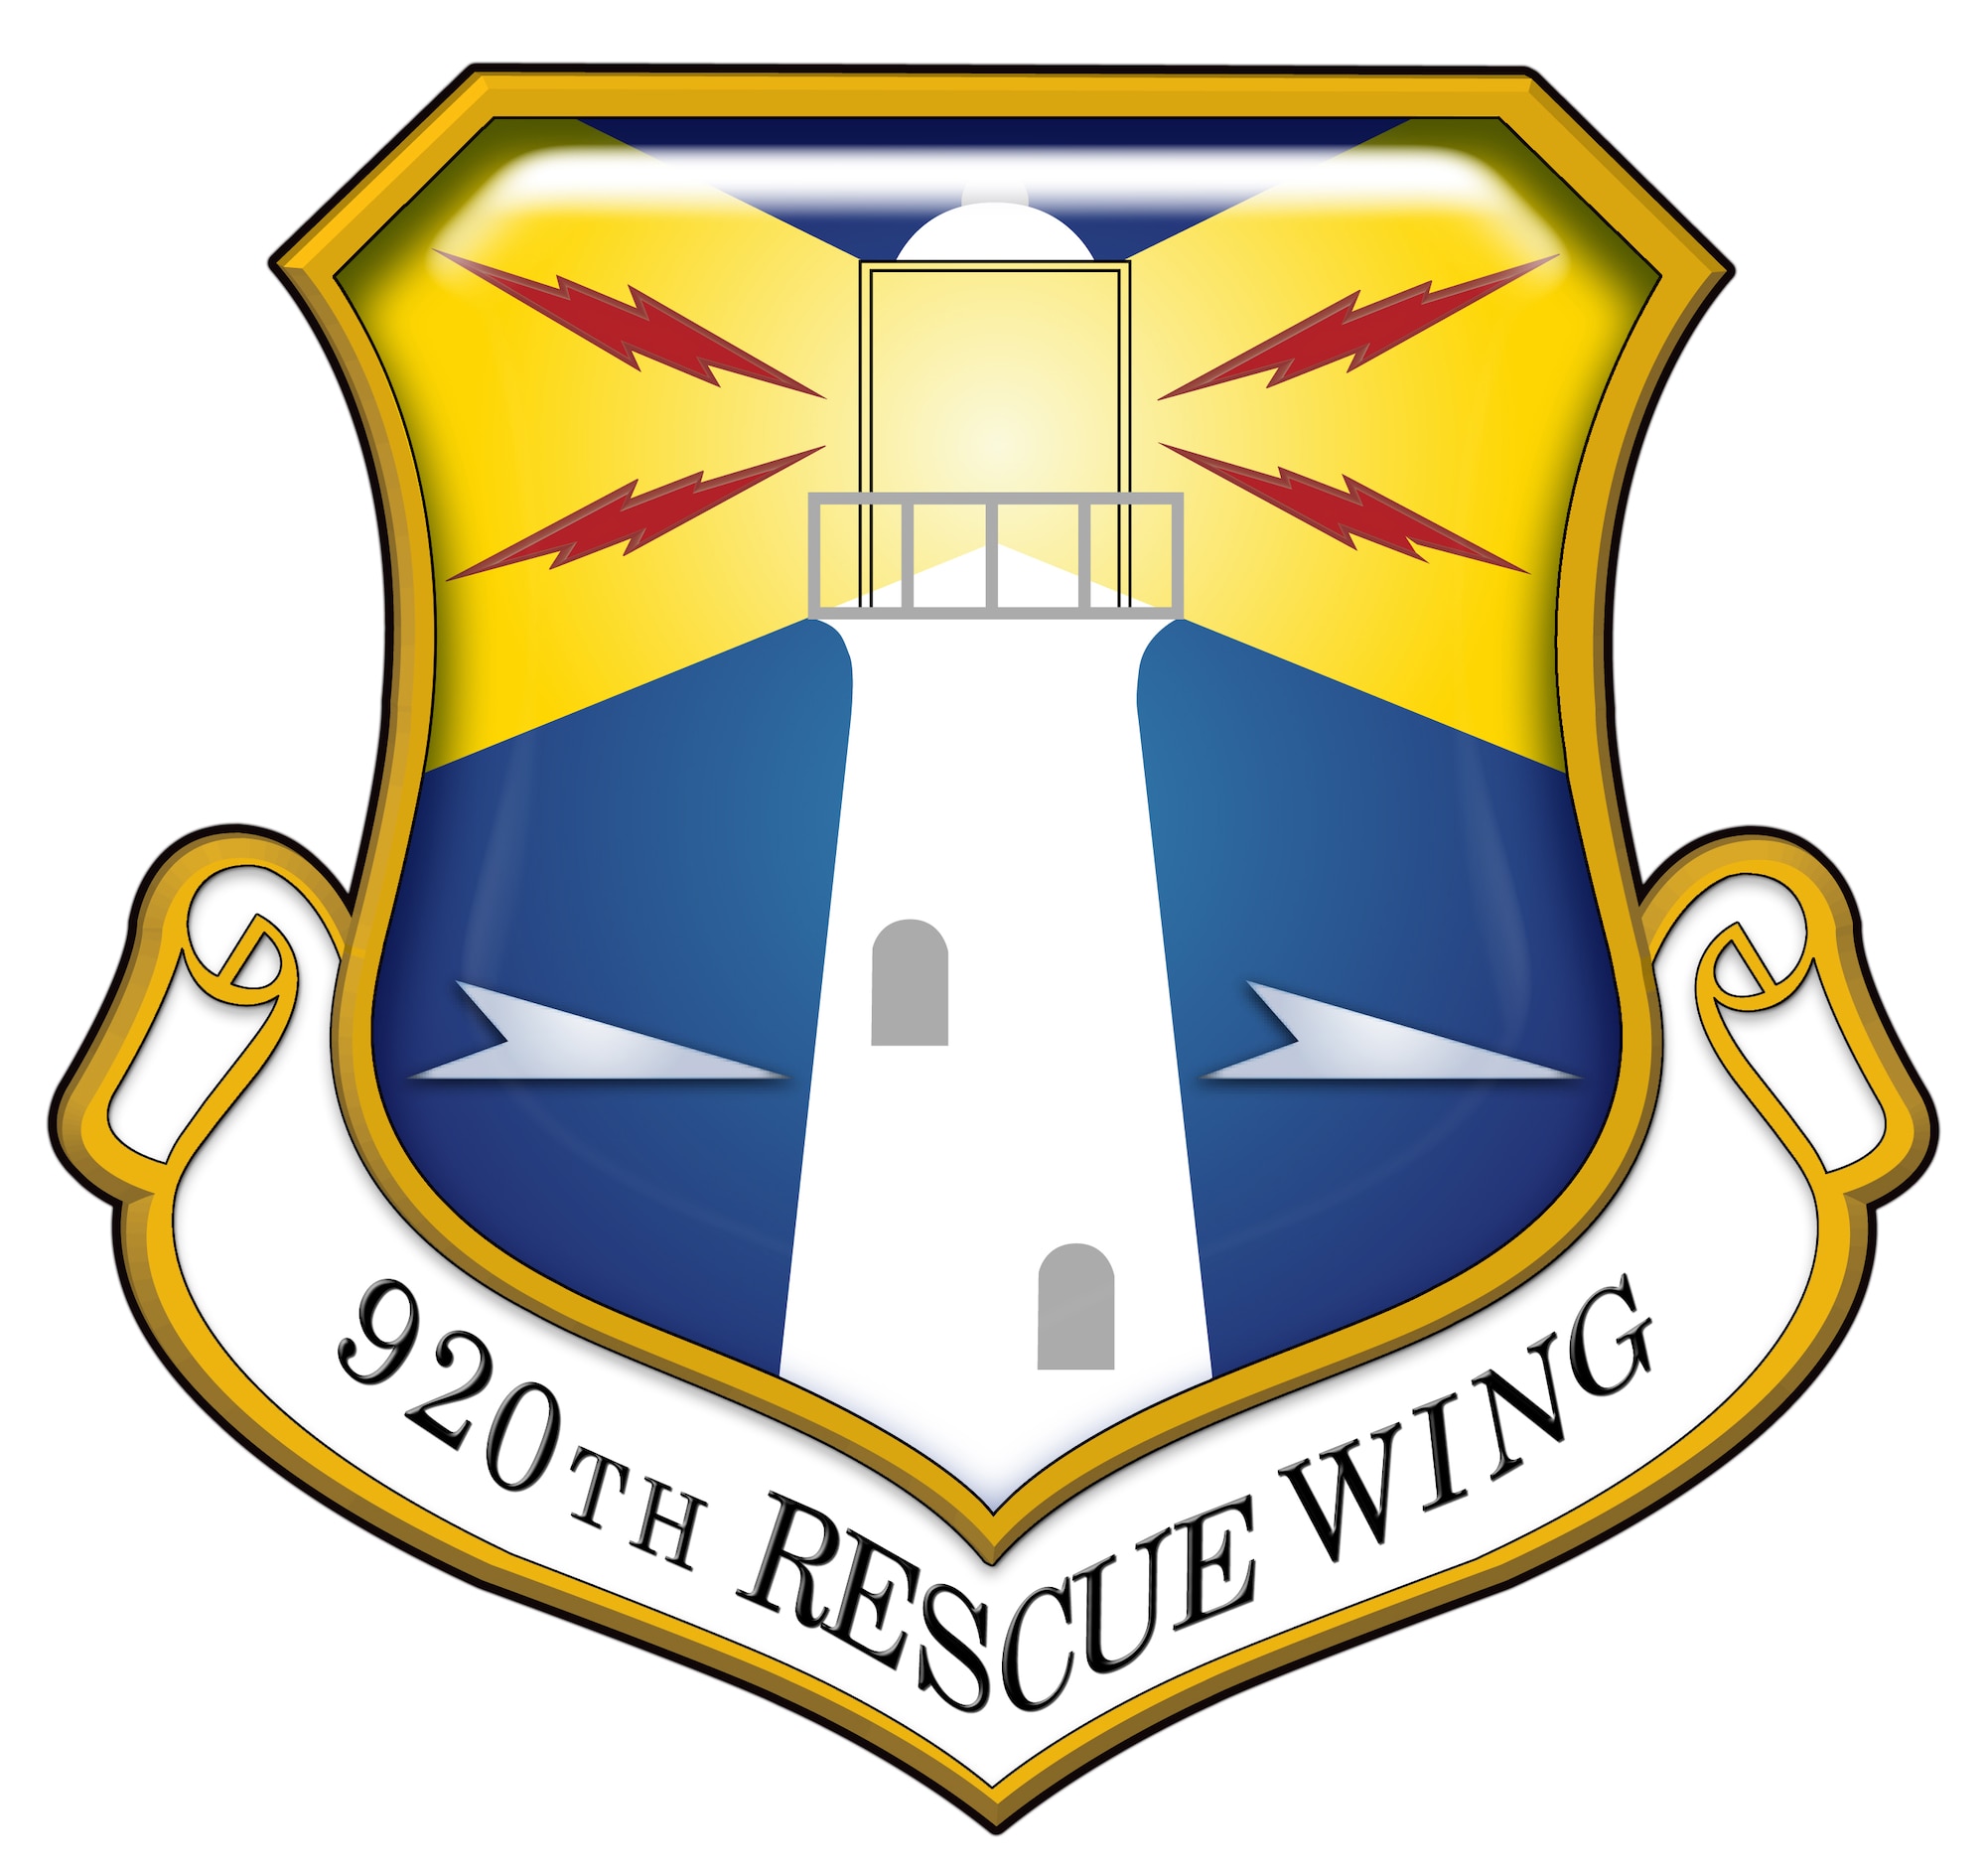 920th Rescue Wing Shield (Color - Stylized). In accordance with Chapter 3 of AFI 84-105, commercial reproduction of this emblem is NOT permitted without the permission of the proponent organizational/unit commander. Image created by Staff Sgt. Paul Flipse of the 920th Public Affairs Office and is 9 x 8.5 inches @ 300dpi.